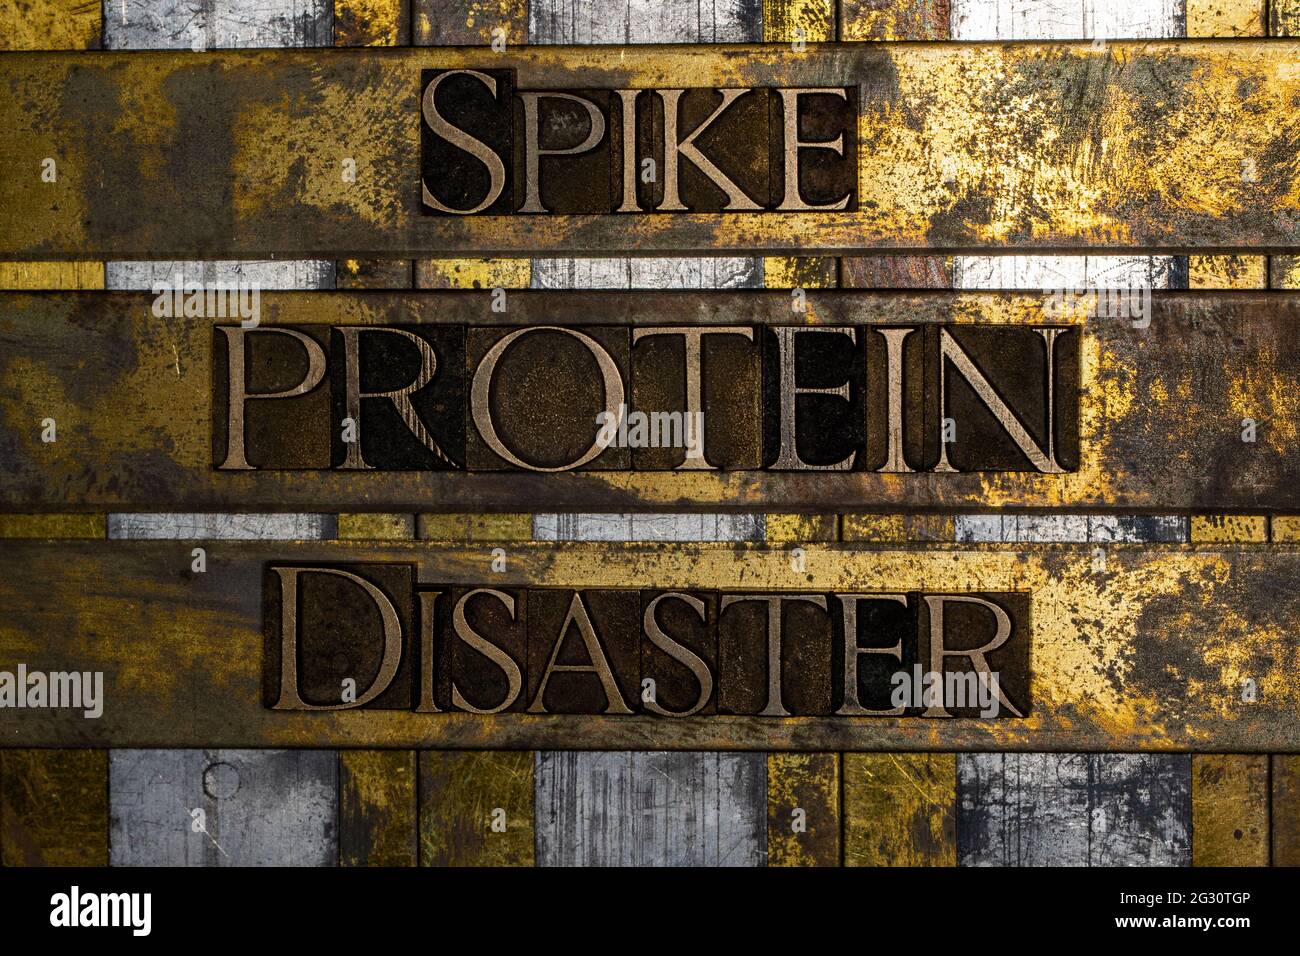 Spike Protein Disaster text on vintage textured grunge copper and gold bar background Stock Photo